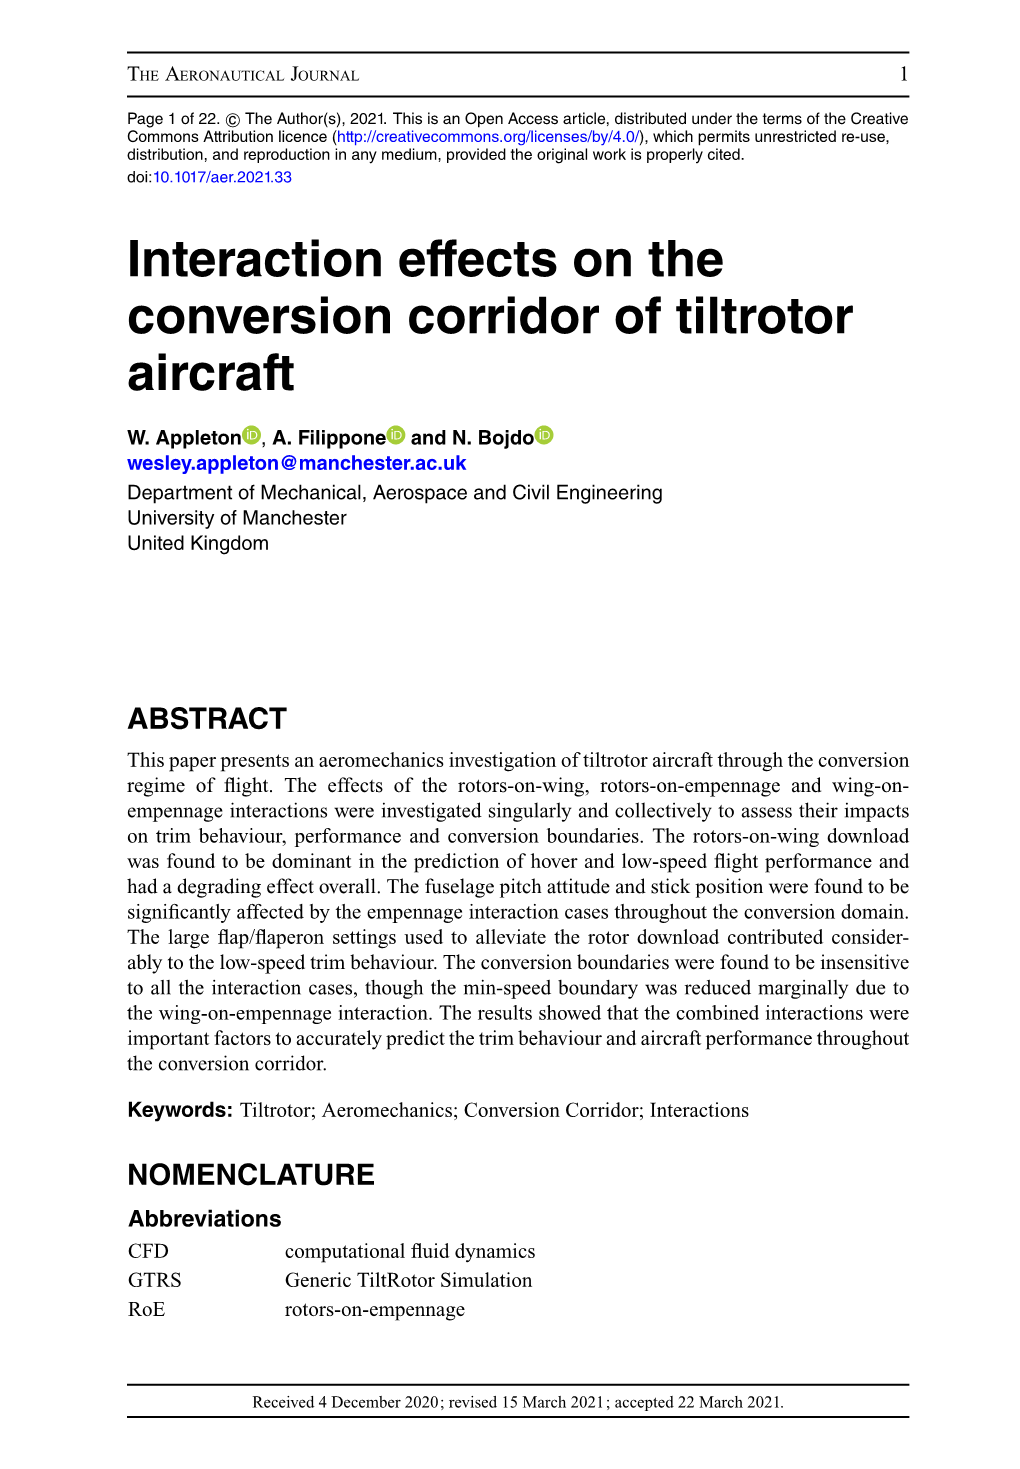 Interaction Effects on the Conversion Corridor of Tiltrotor Aircraft